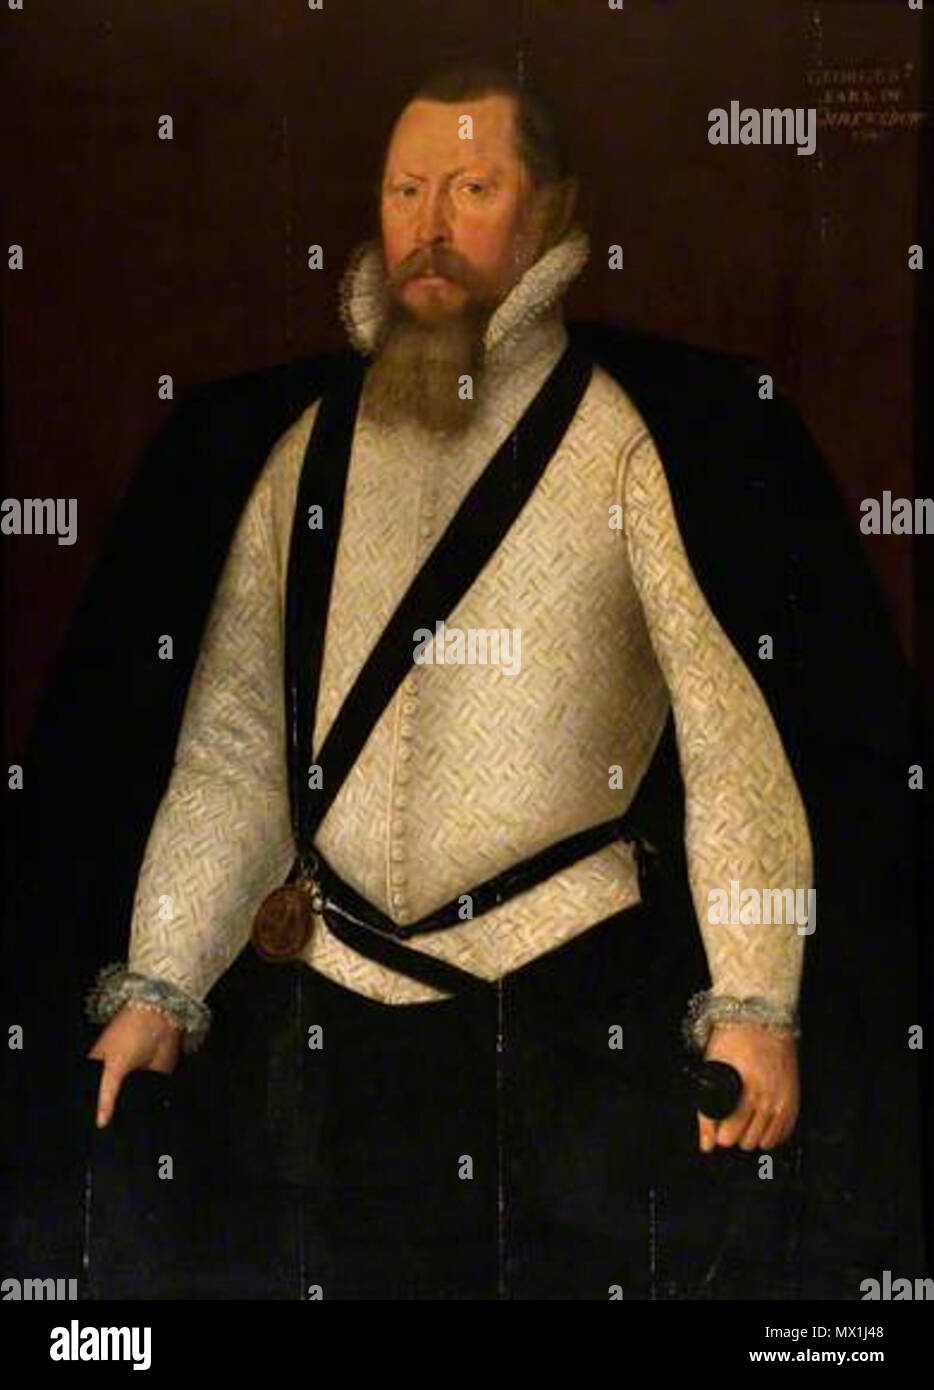 . English: Portrait of George Talbot, 6th Earl of Shrewsbury, by an unknown artist of the English school. Dated 1580. Oil on canvas, 110 cm x 90 cm. Courtesy of the collections of Ingestre Hall Residential Arts Centre. 18 January 2012, 04:33:24. unknown painter of the English school 240 George Talbot, 6th Earl of Shrewsbury by an unknown artist 1580 Stock Photo